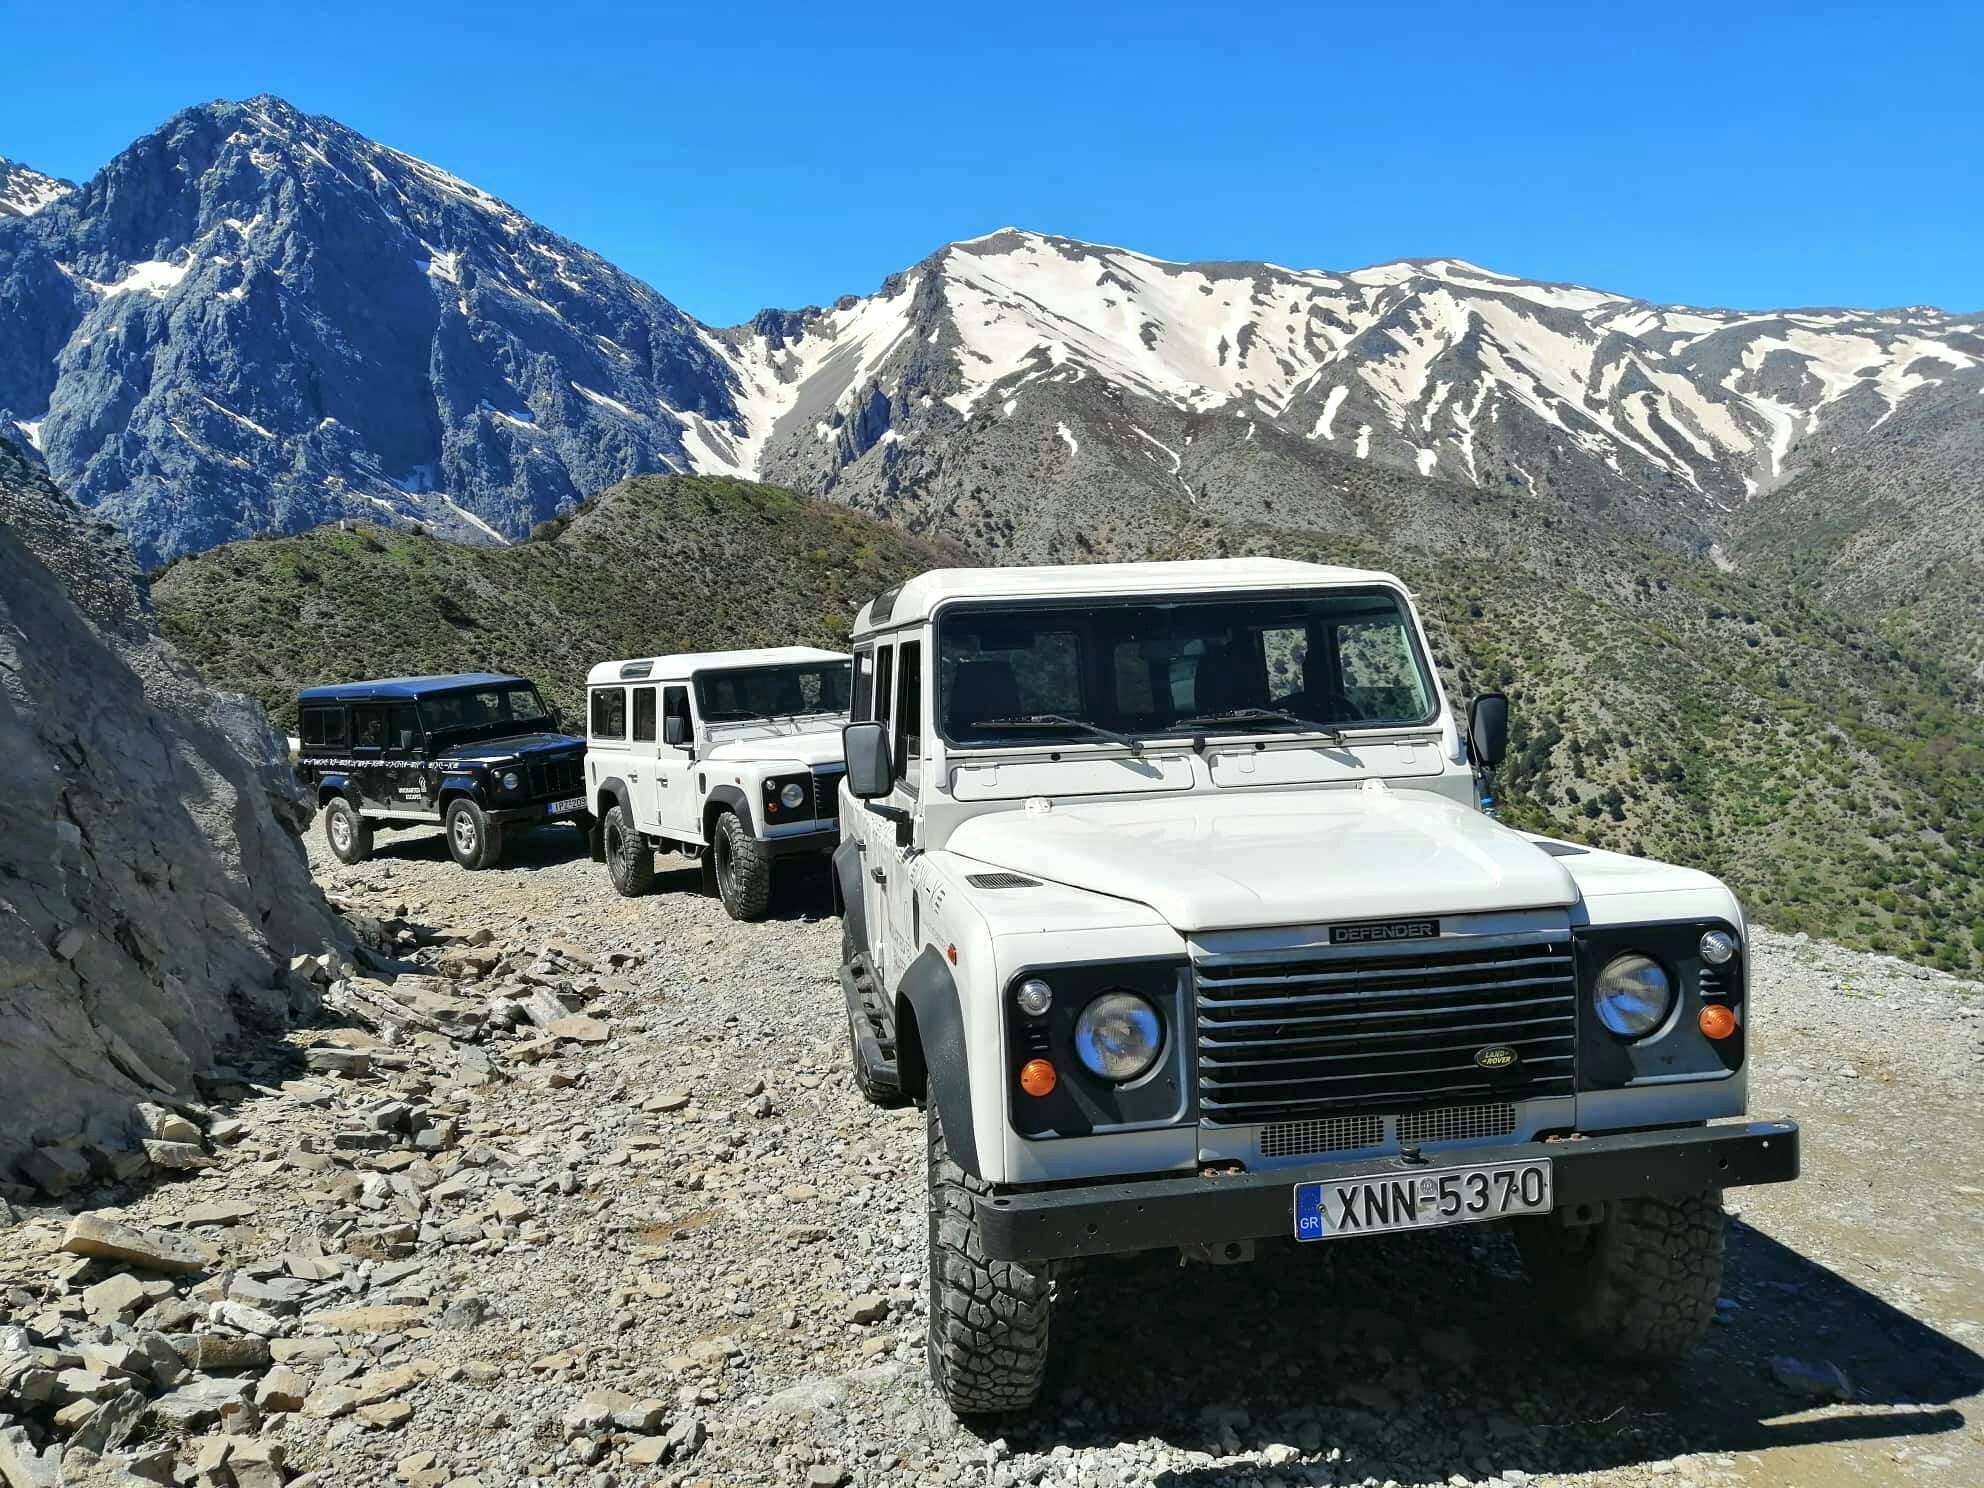 Flavours of Crete 4x4 Tour with Monastery and Winery Visits